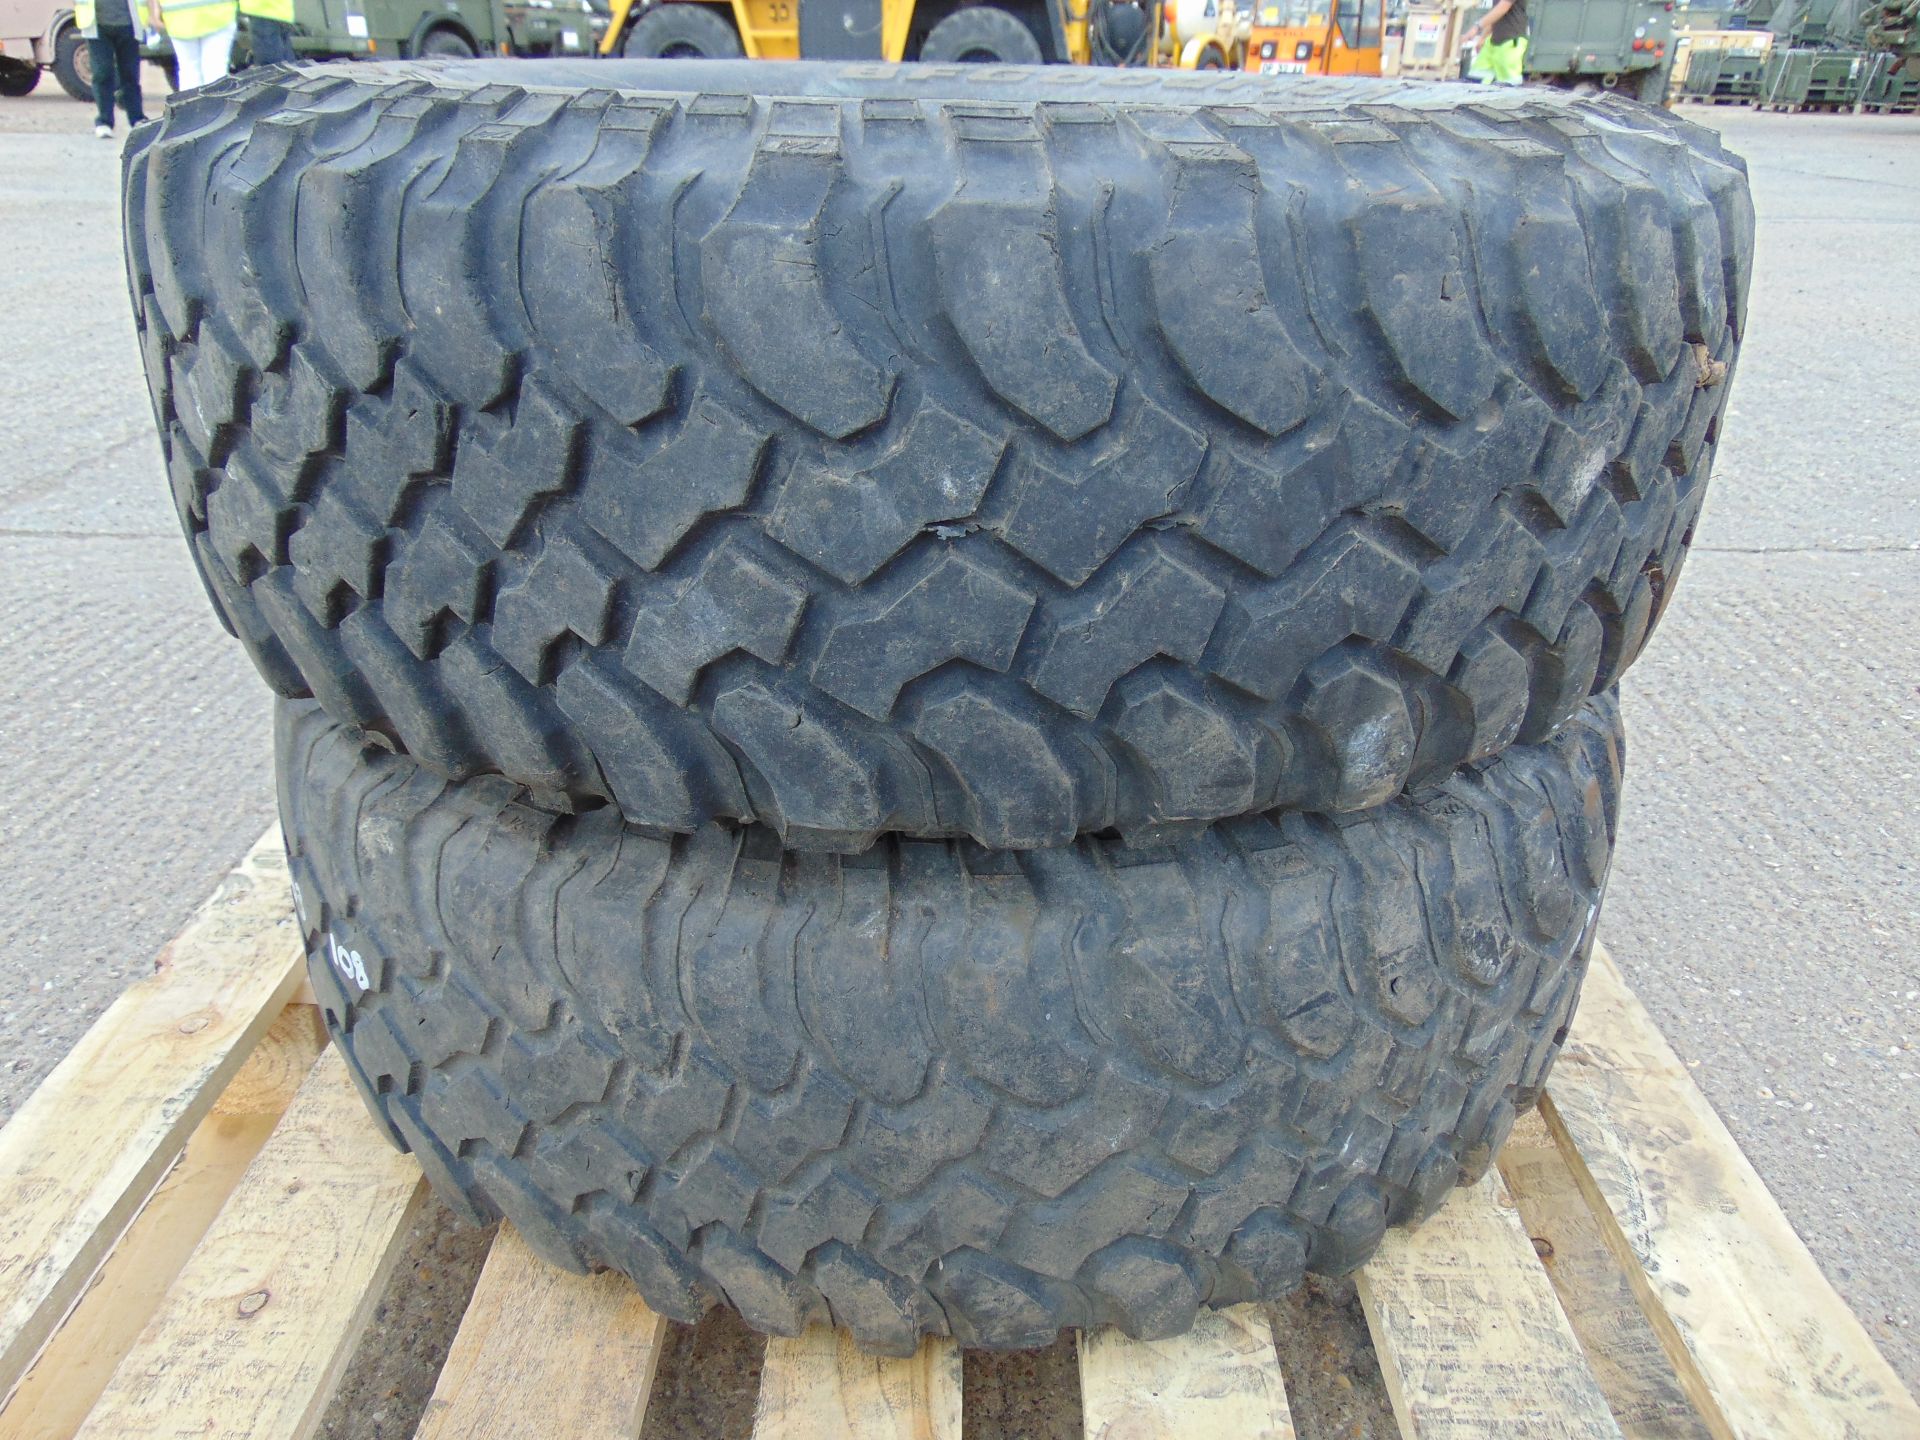 2 x BF Goodrich Mud Terrain TA LT 285/75 R16 Tyres complete with Rims - Image 6 of 7